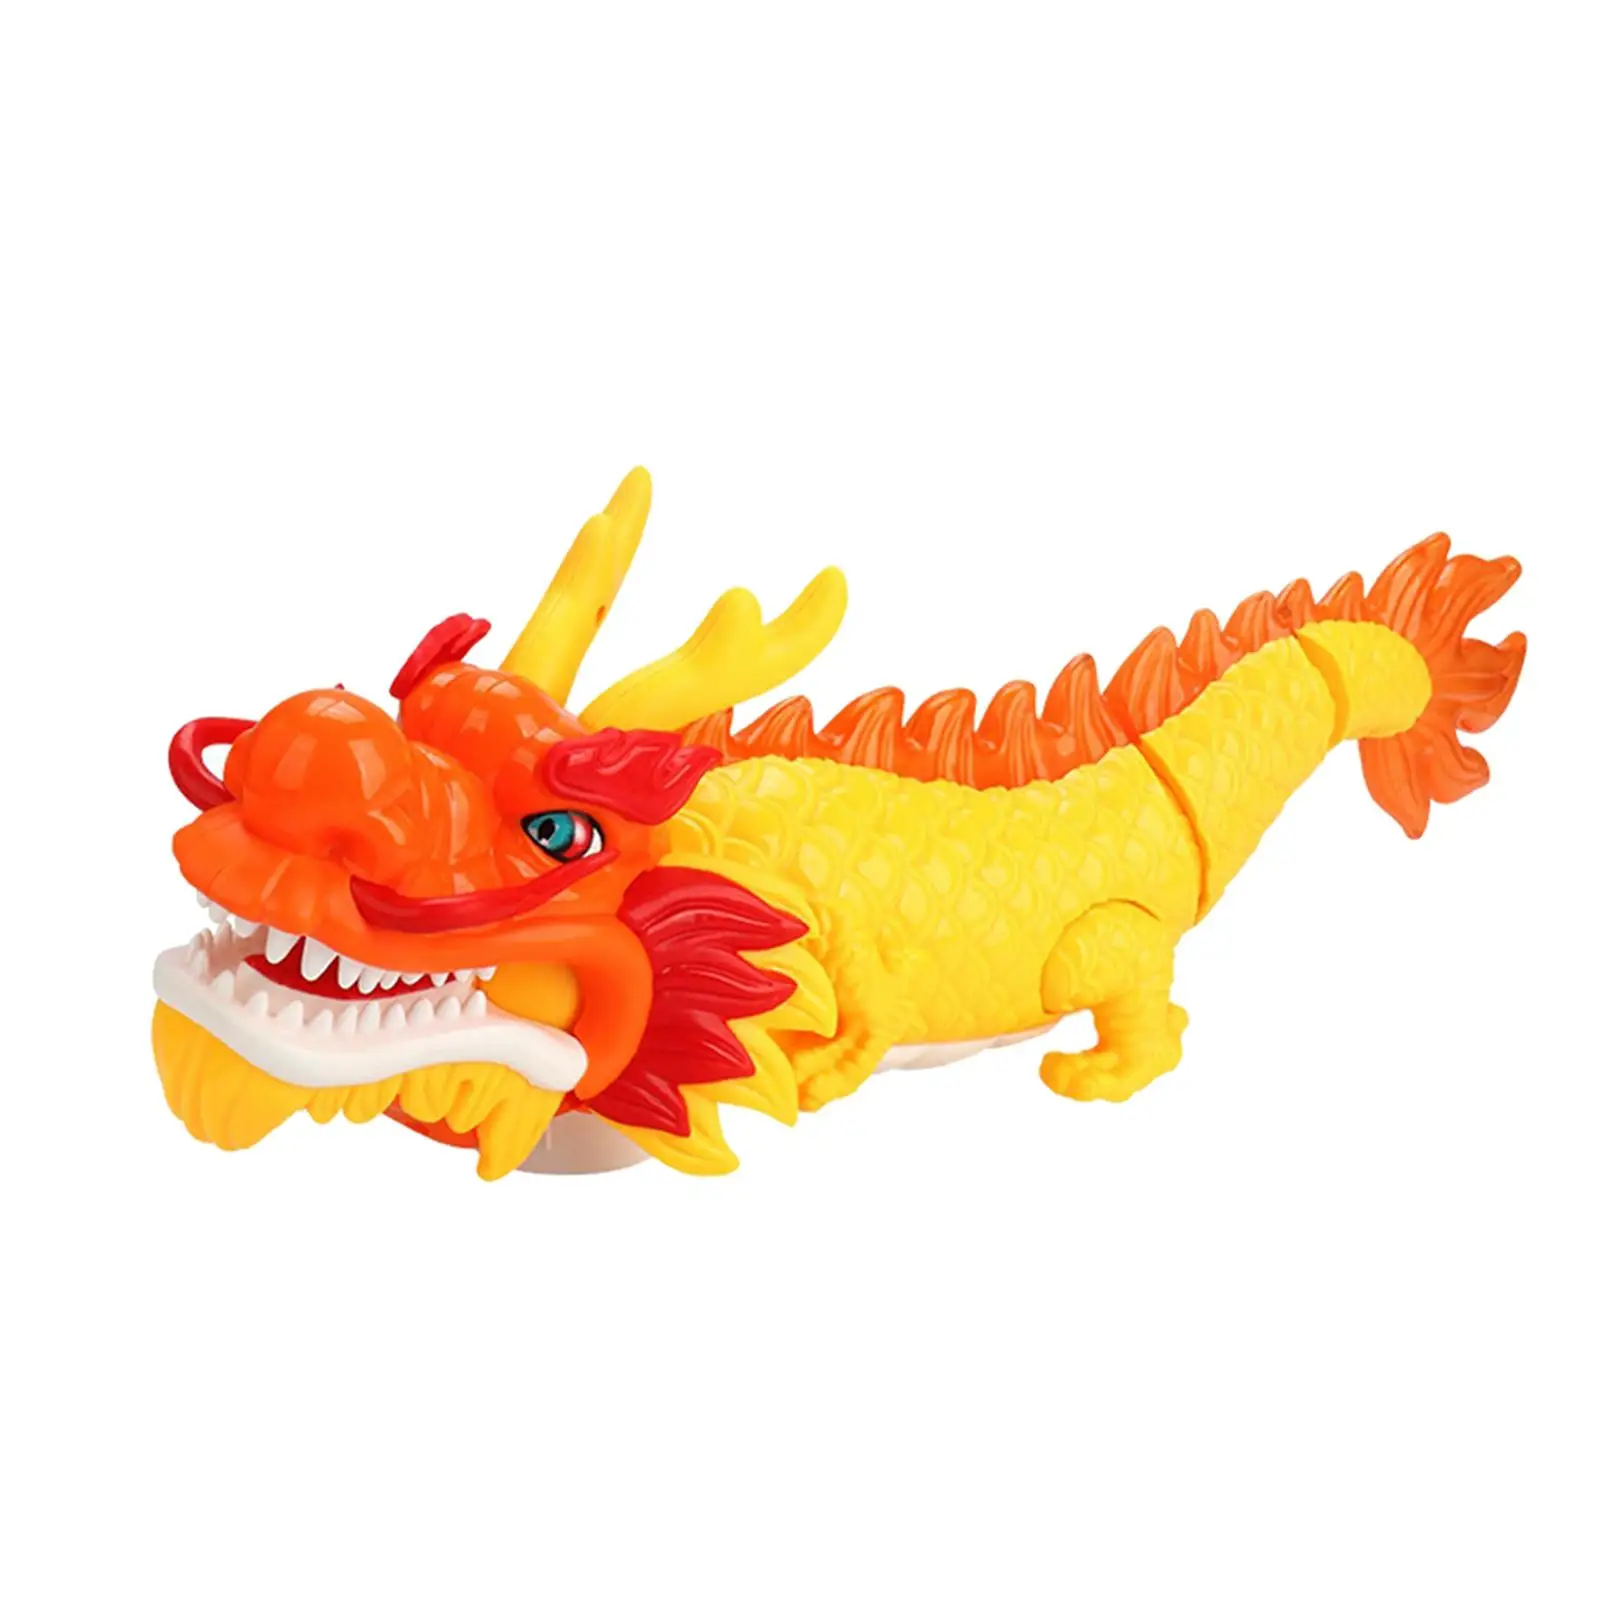 Eletric Dragon Toy Bathroom Outdoor Gifts High Simulation Crawling Toy for Boy 4 5 6 7 8 9 Year Olds Adults Children Girls